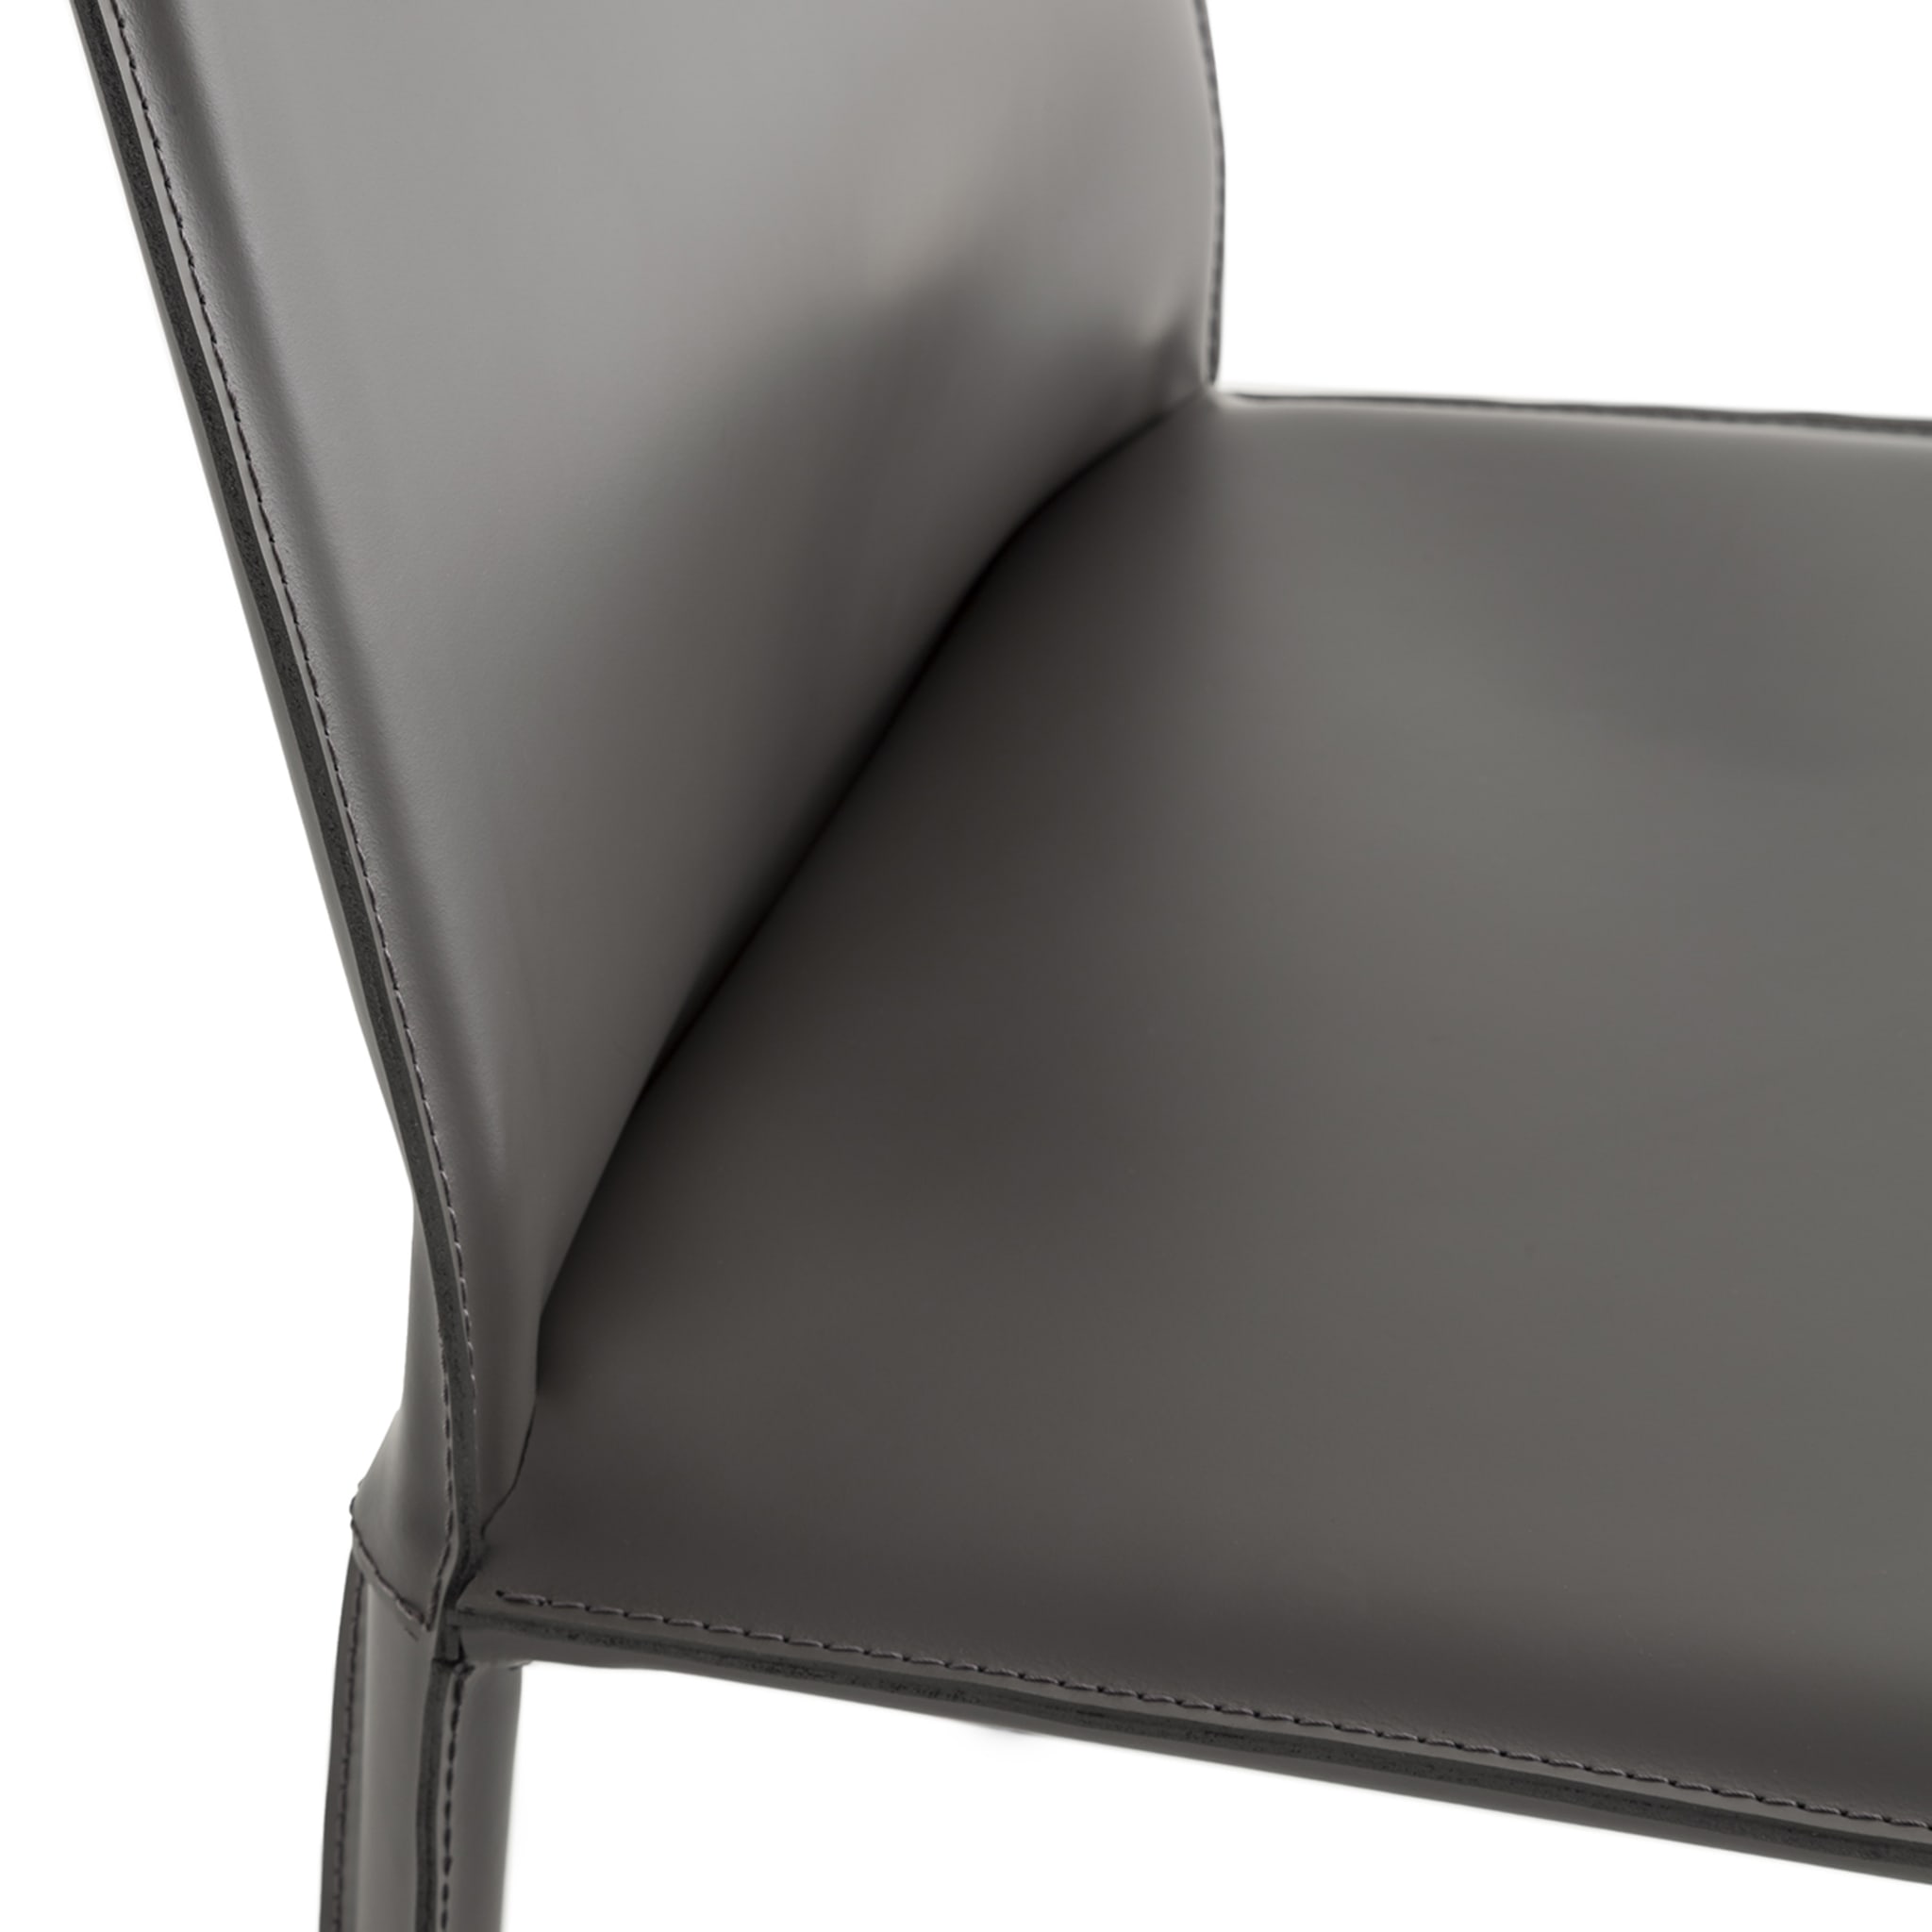 Jumpsuite Gray Leather Chair - Alternative view 1